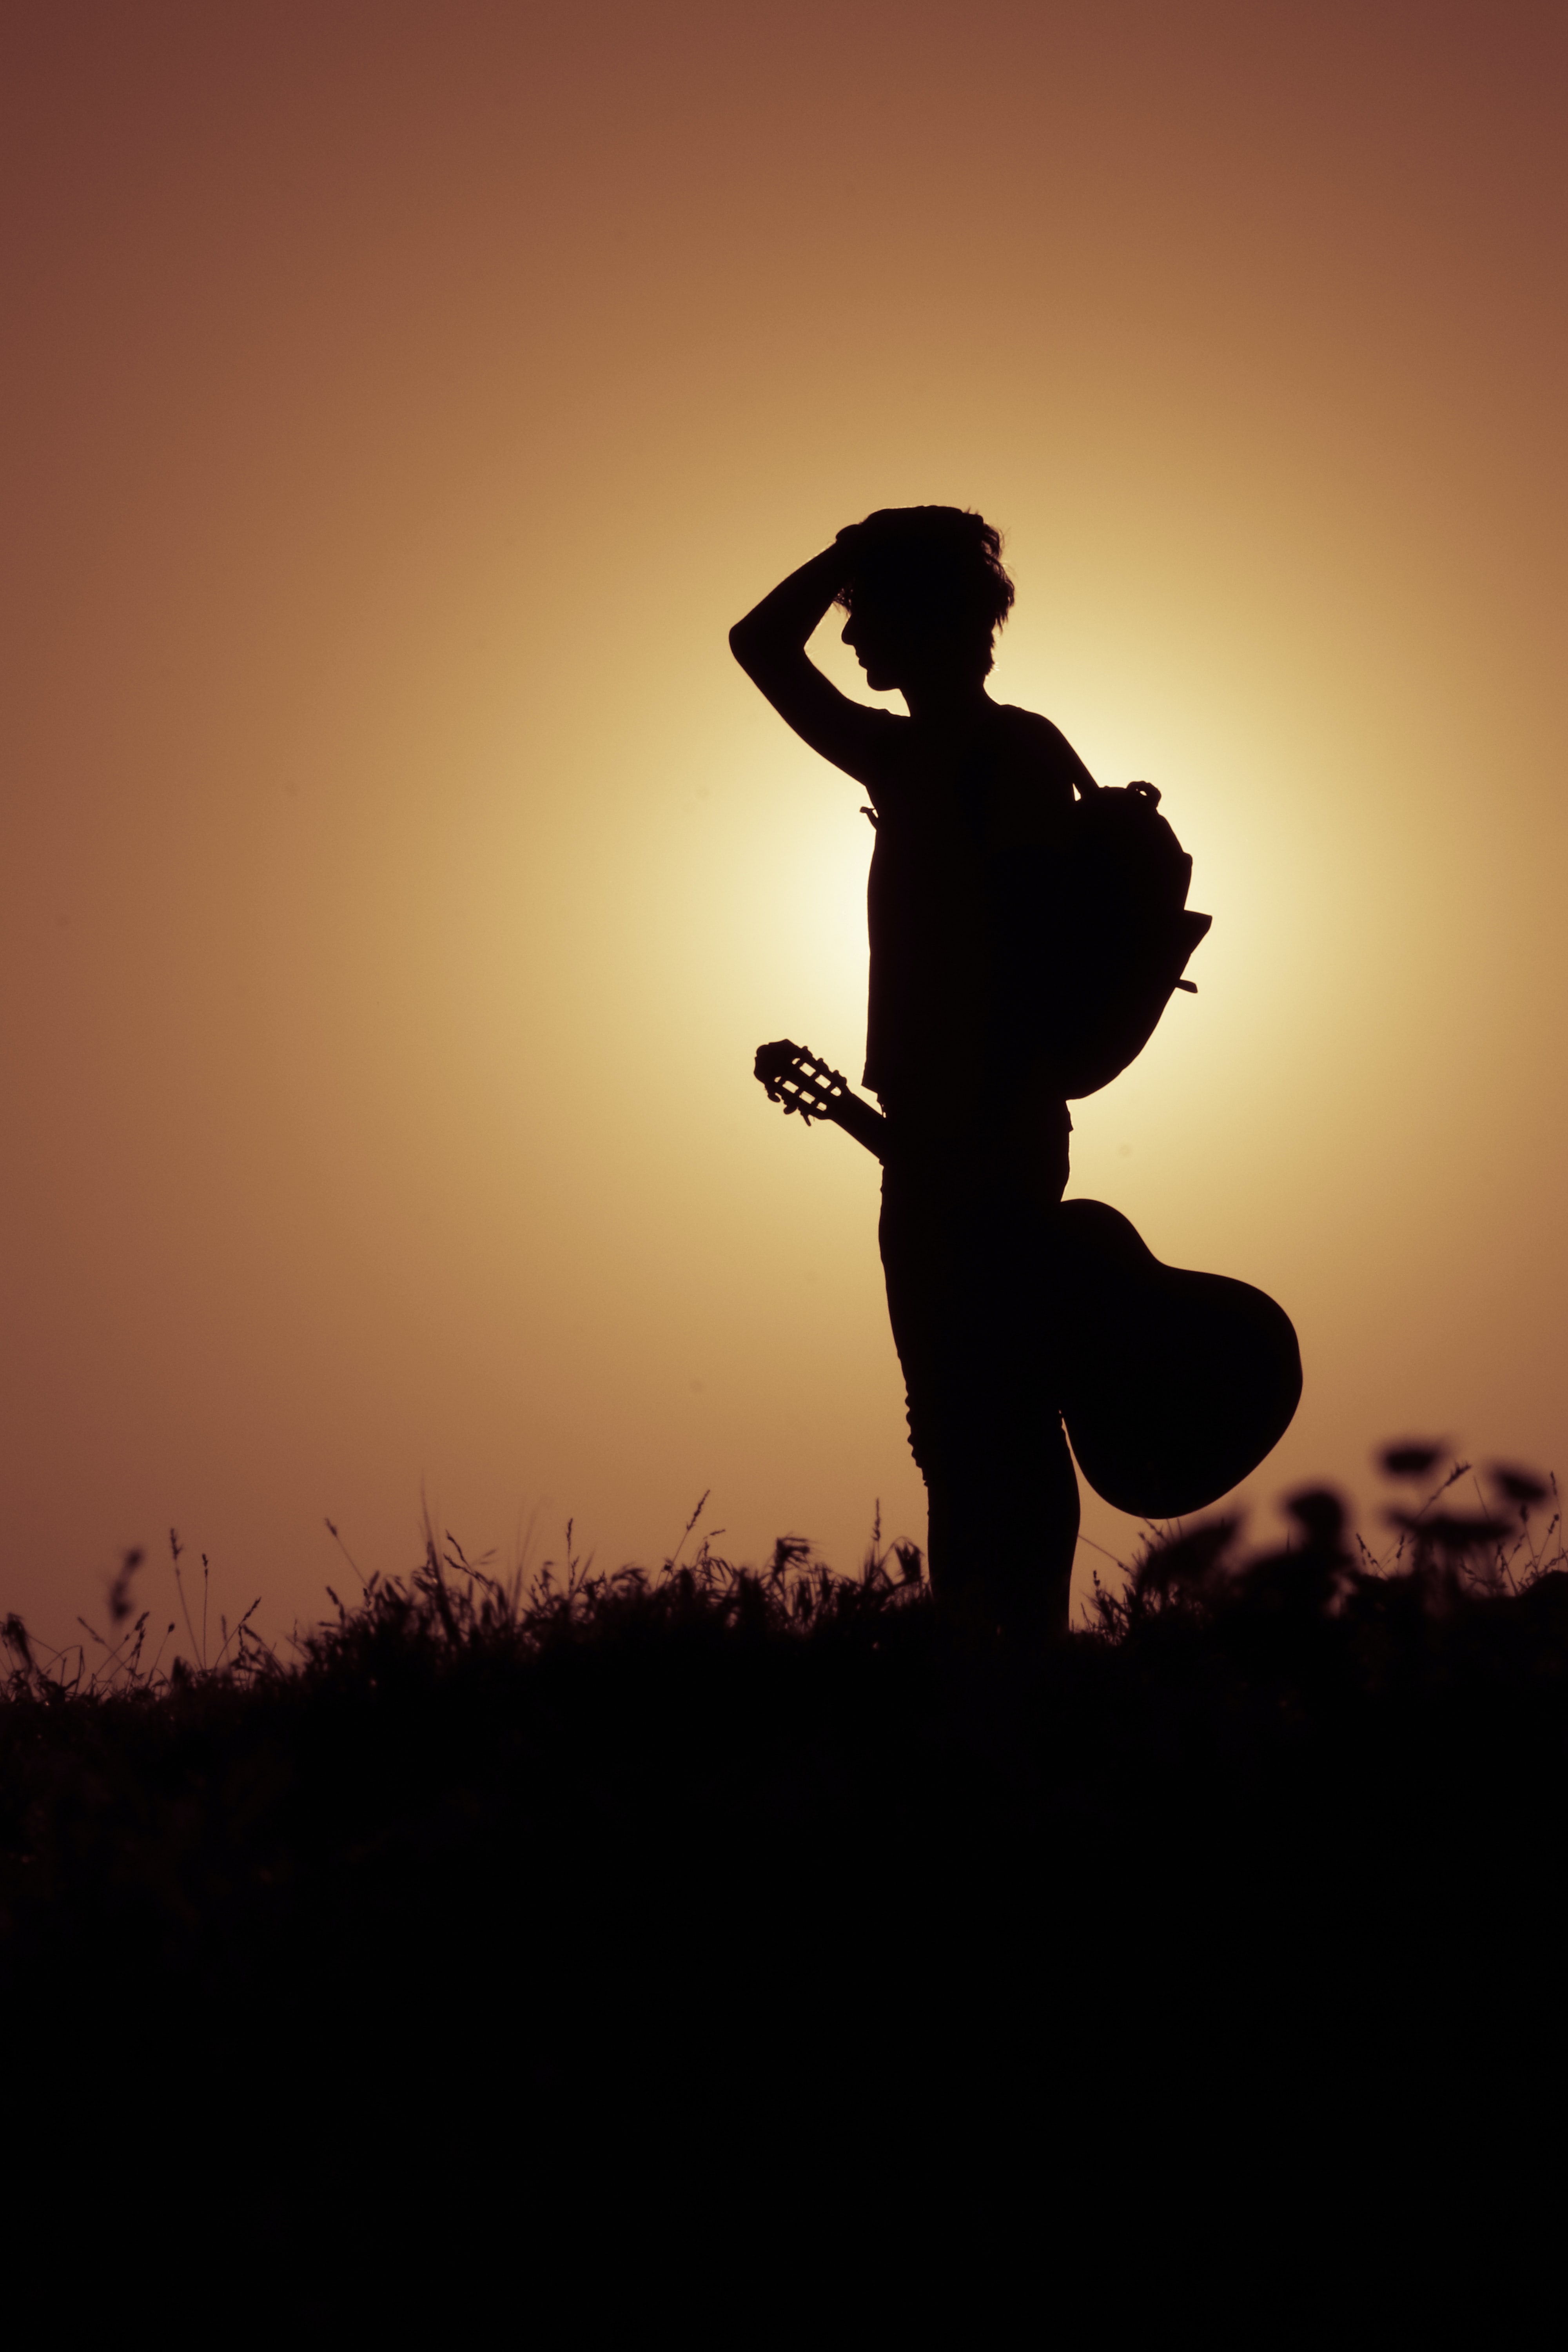 guitar, musician, musical instrument, sunset, silhouette, miscellanea, miscellaneous for android